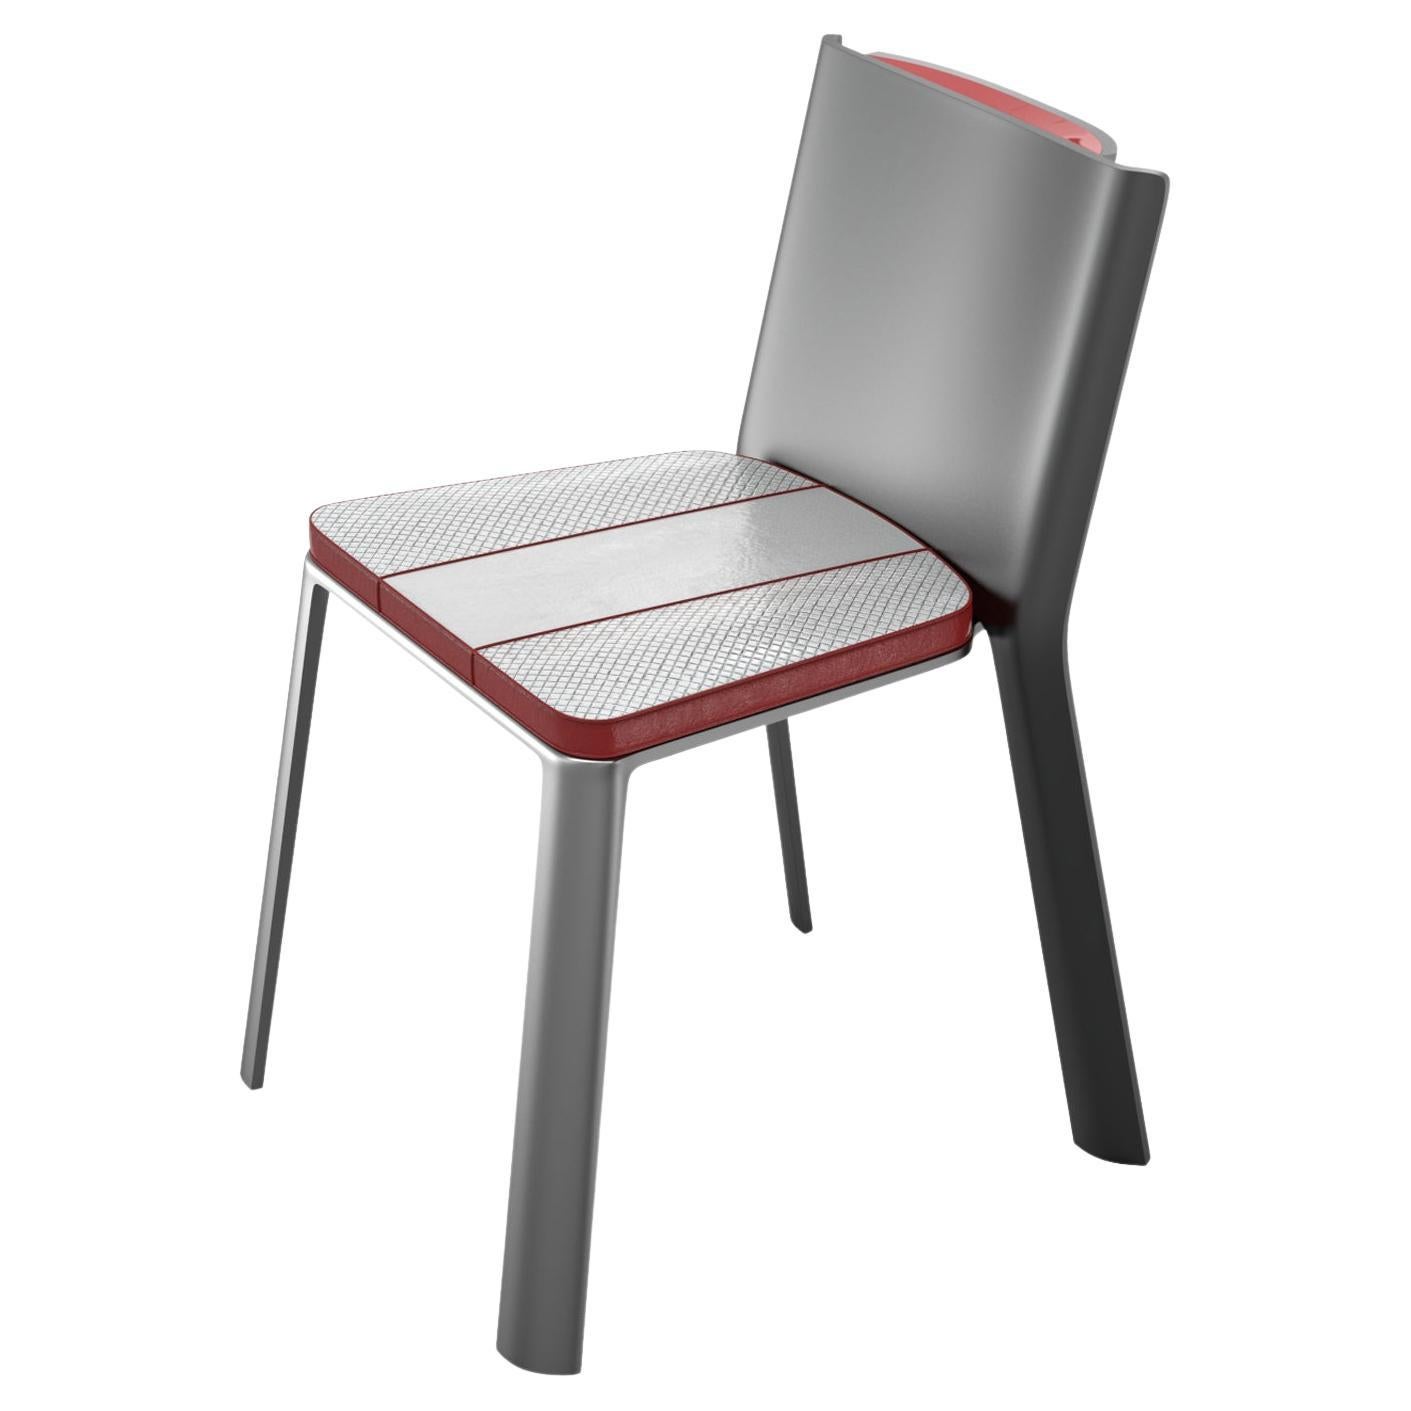 "Ghiaccio" Chair with Stainless Steel and Tailor Made Bottega Leather, Istanbul For Sale